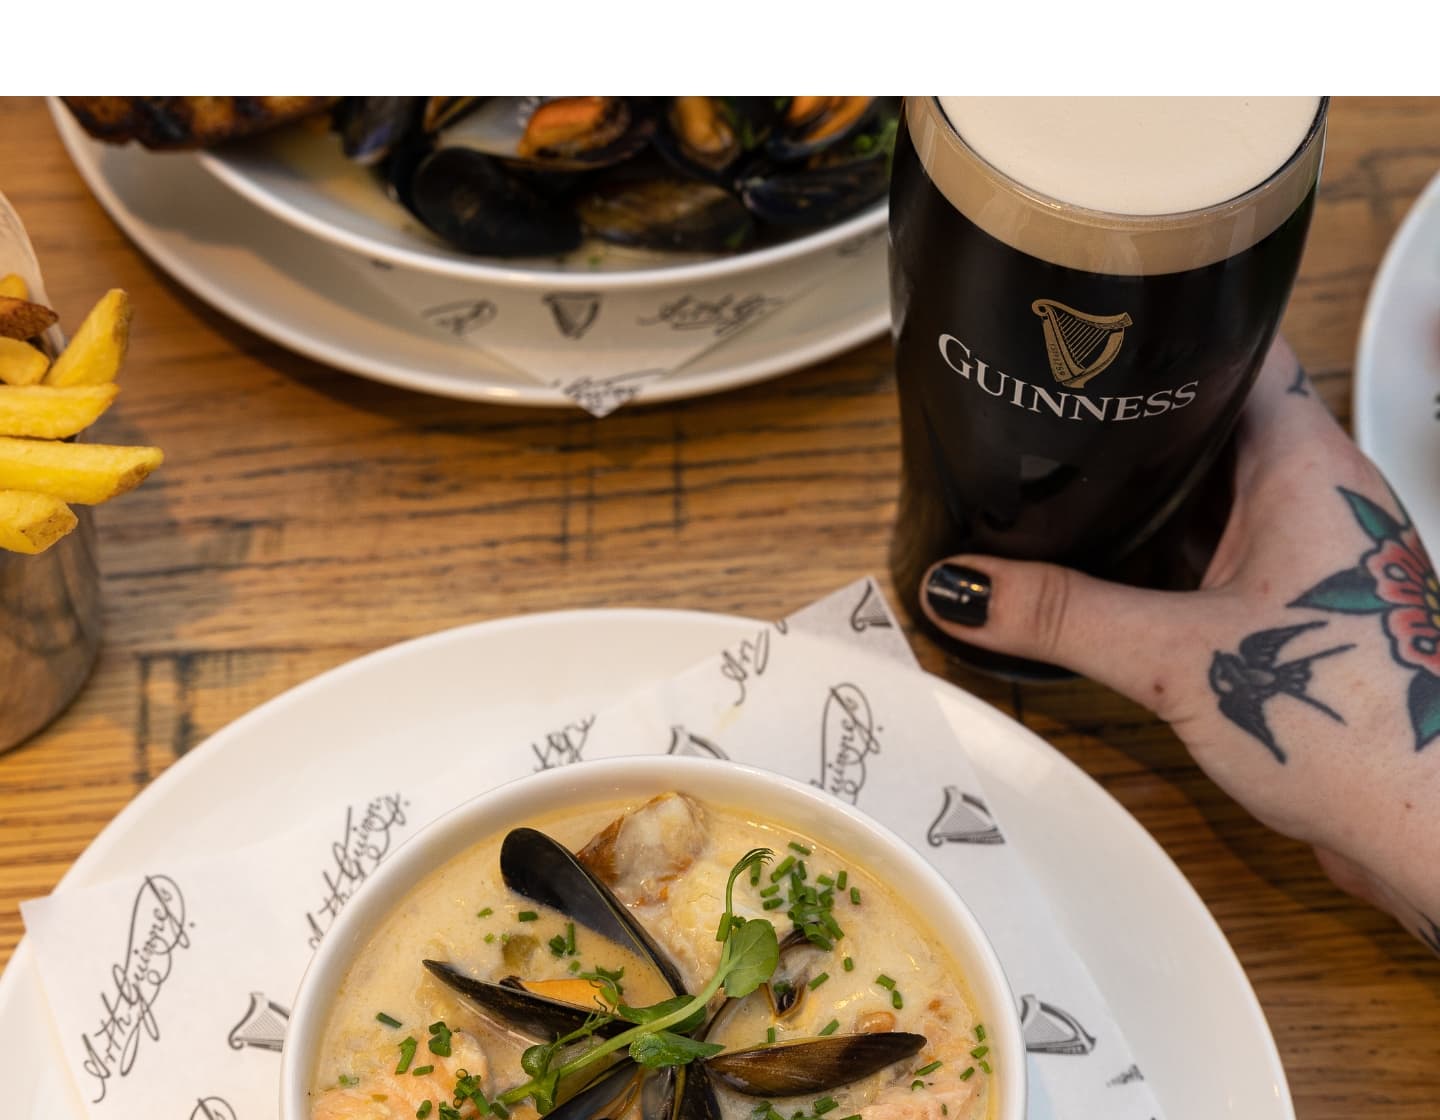 Hand holding a pint of Guinness next to a bowl of clam soup